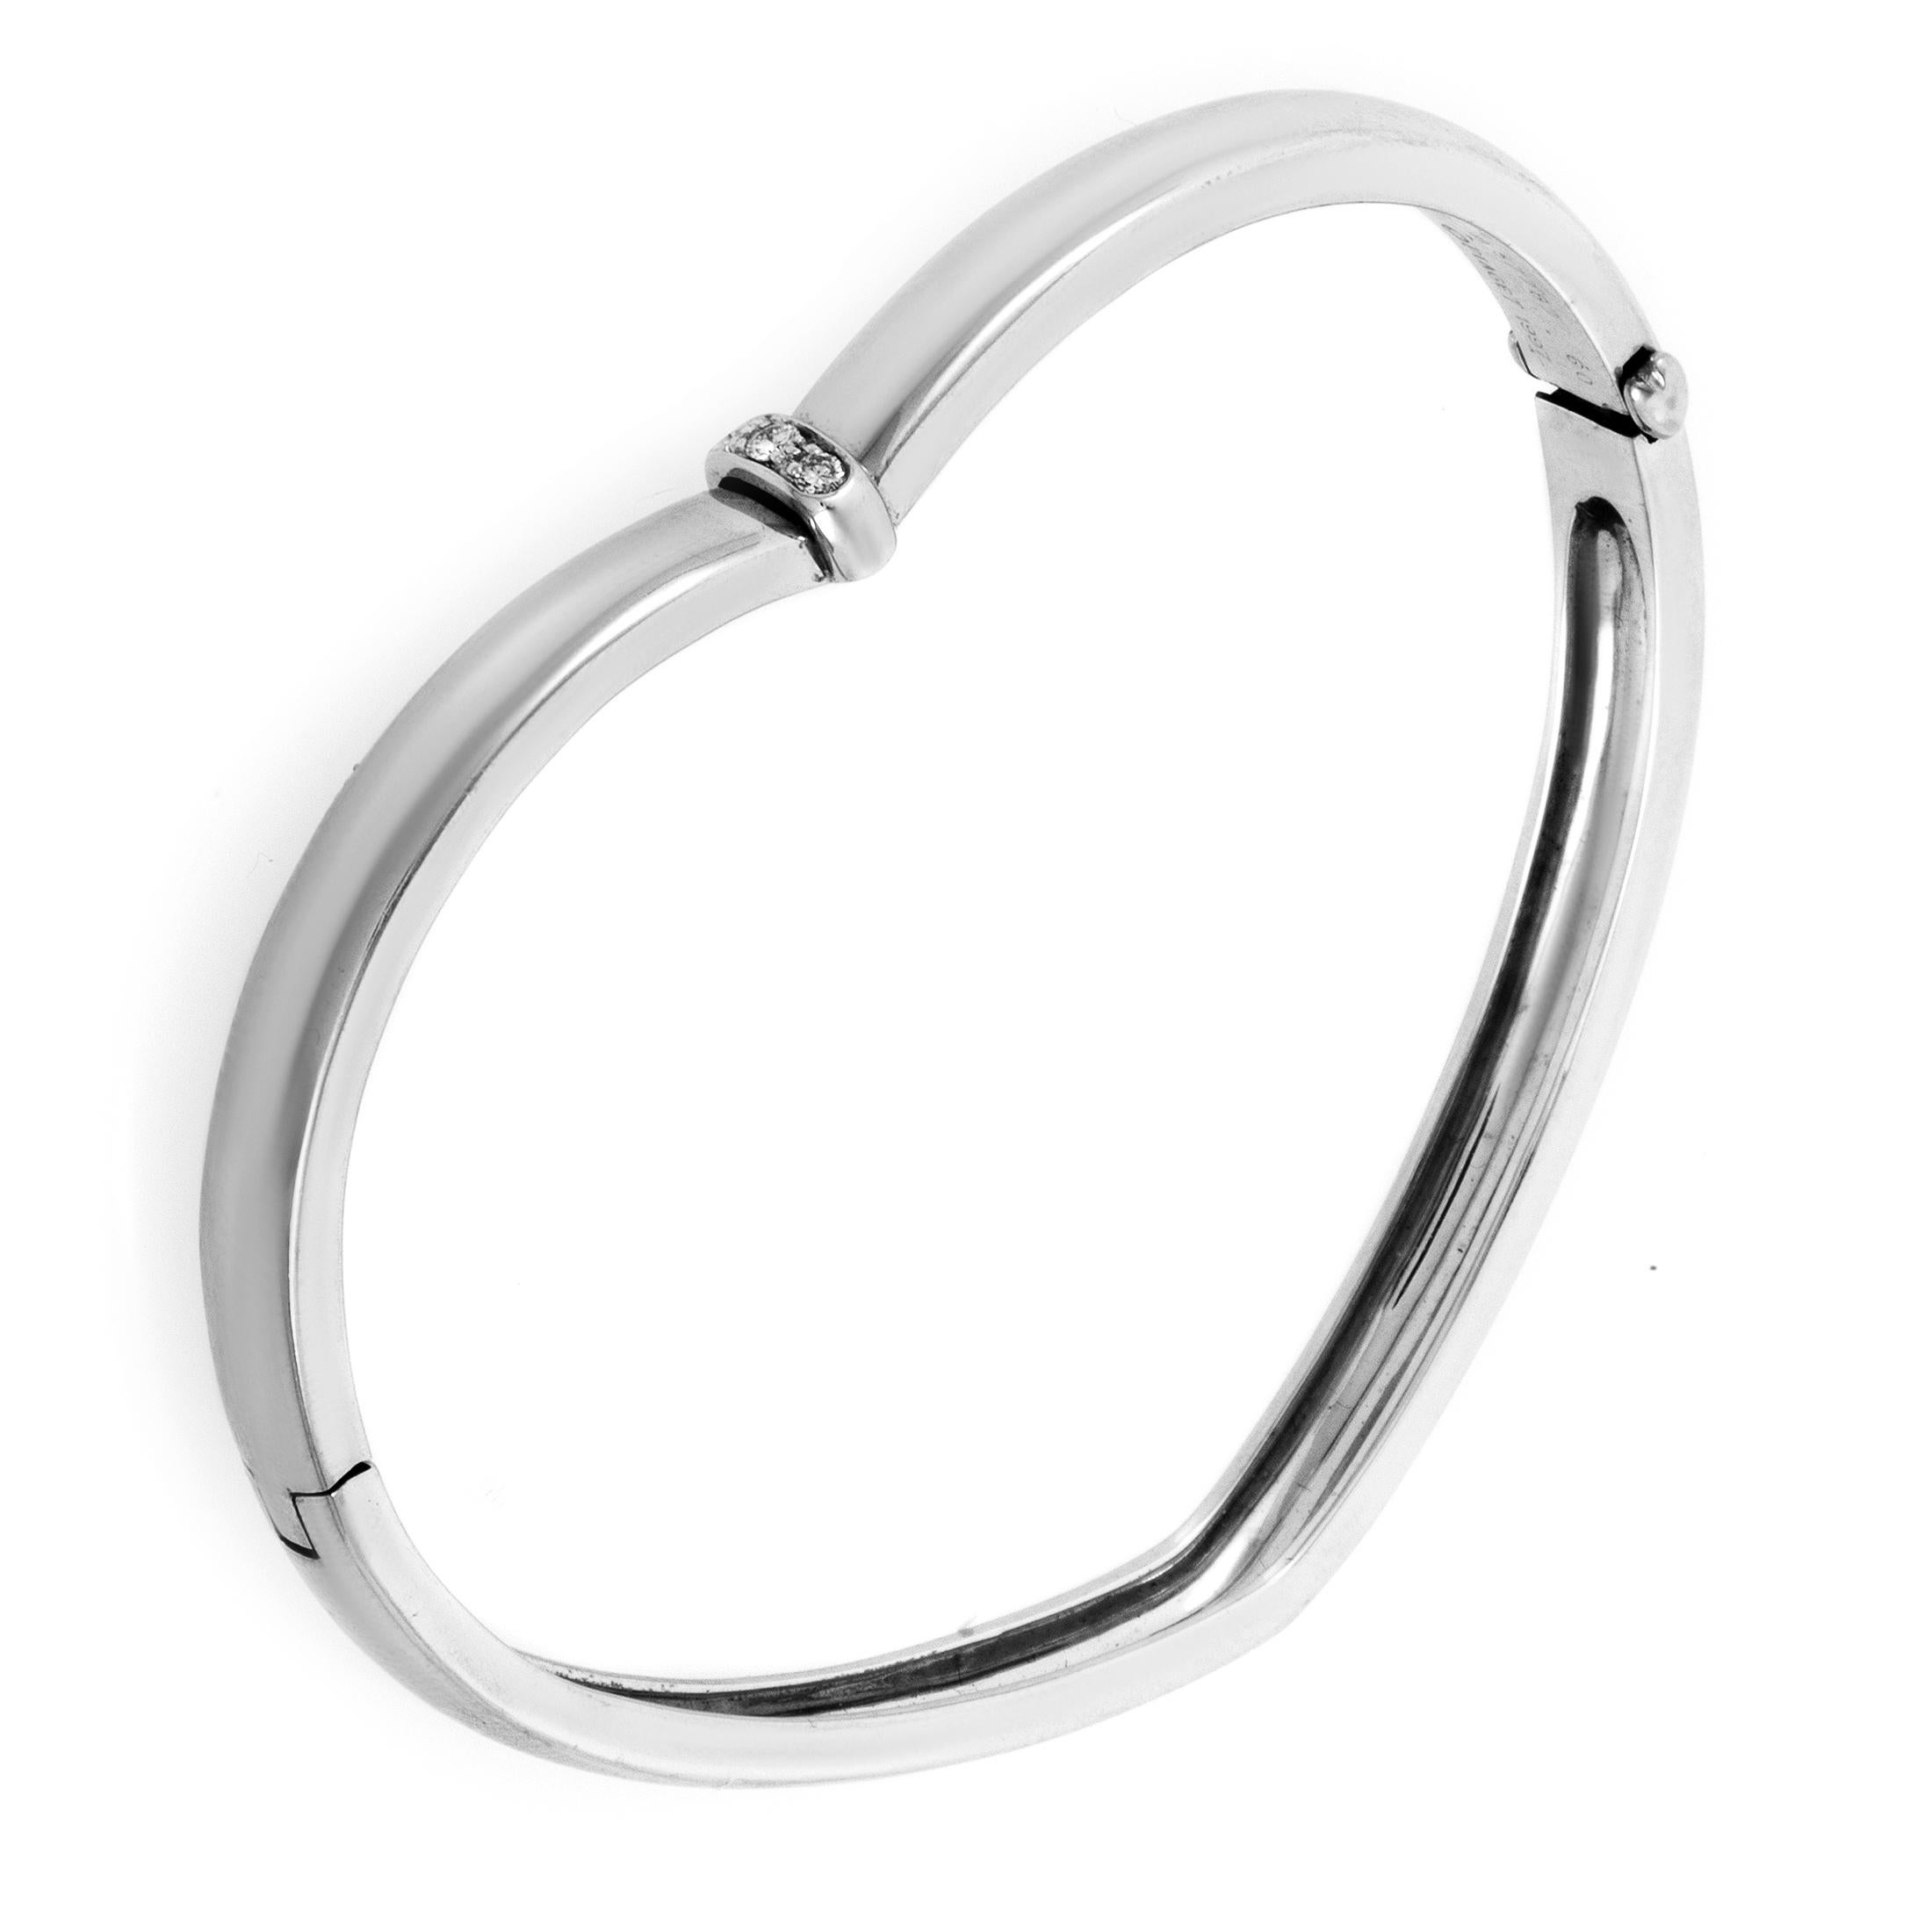 This heart-shaped bracelet from Piaget is the perfect accessory for the one you love. The bracelet is made of 18K white gold and is daintily accented with .10ct of white diamonds.
